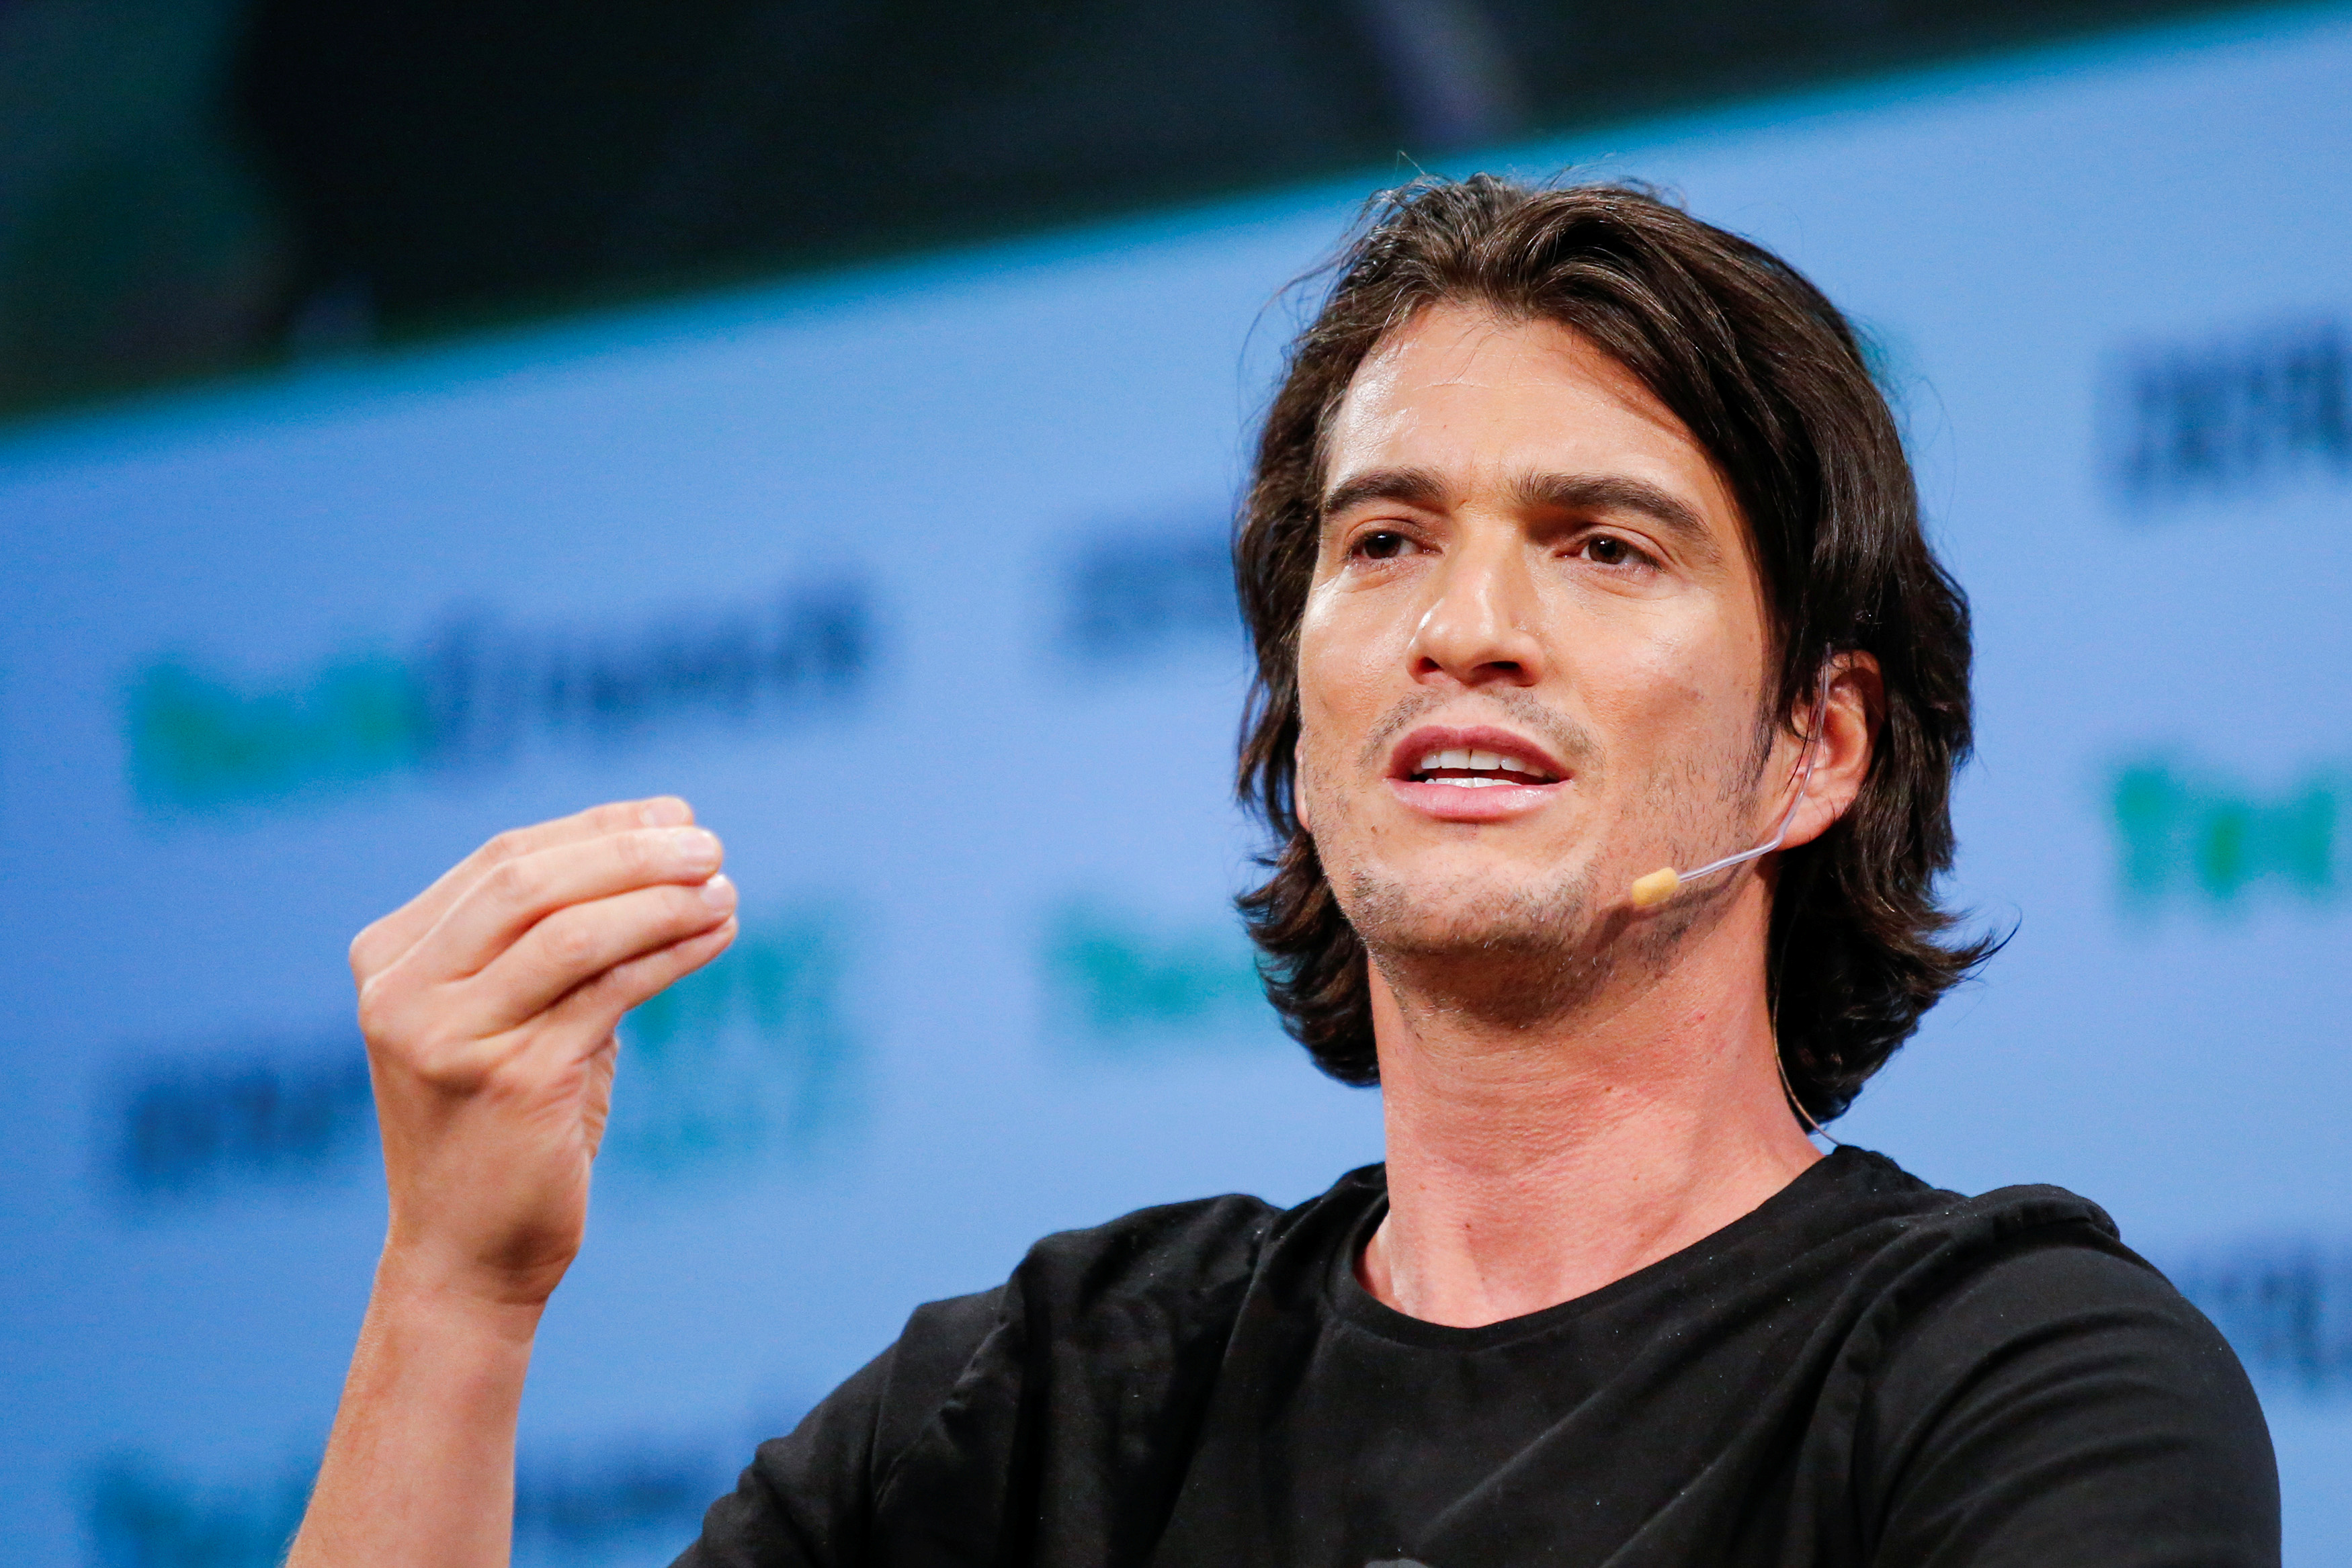 WeWork founder Adam Neumann trying to buy back company | Reuters